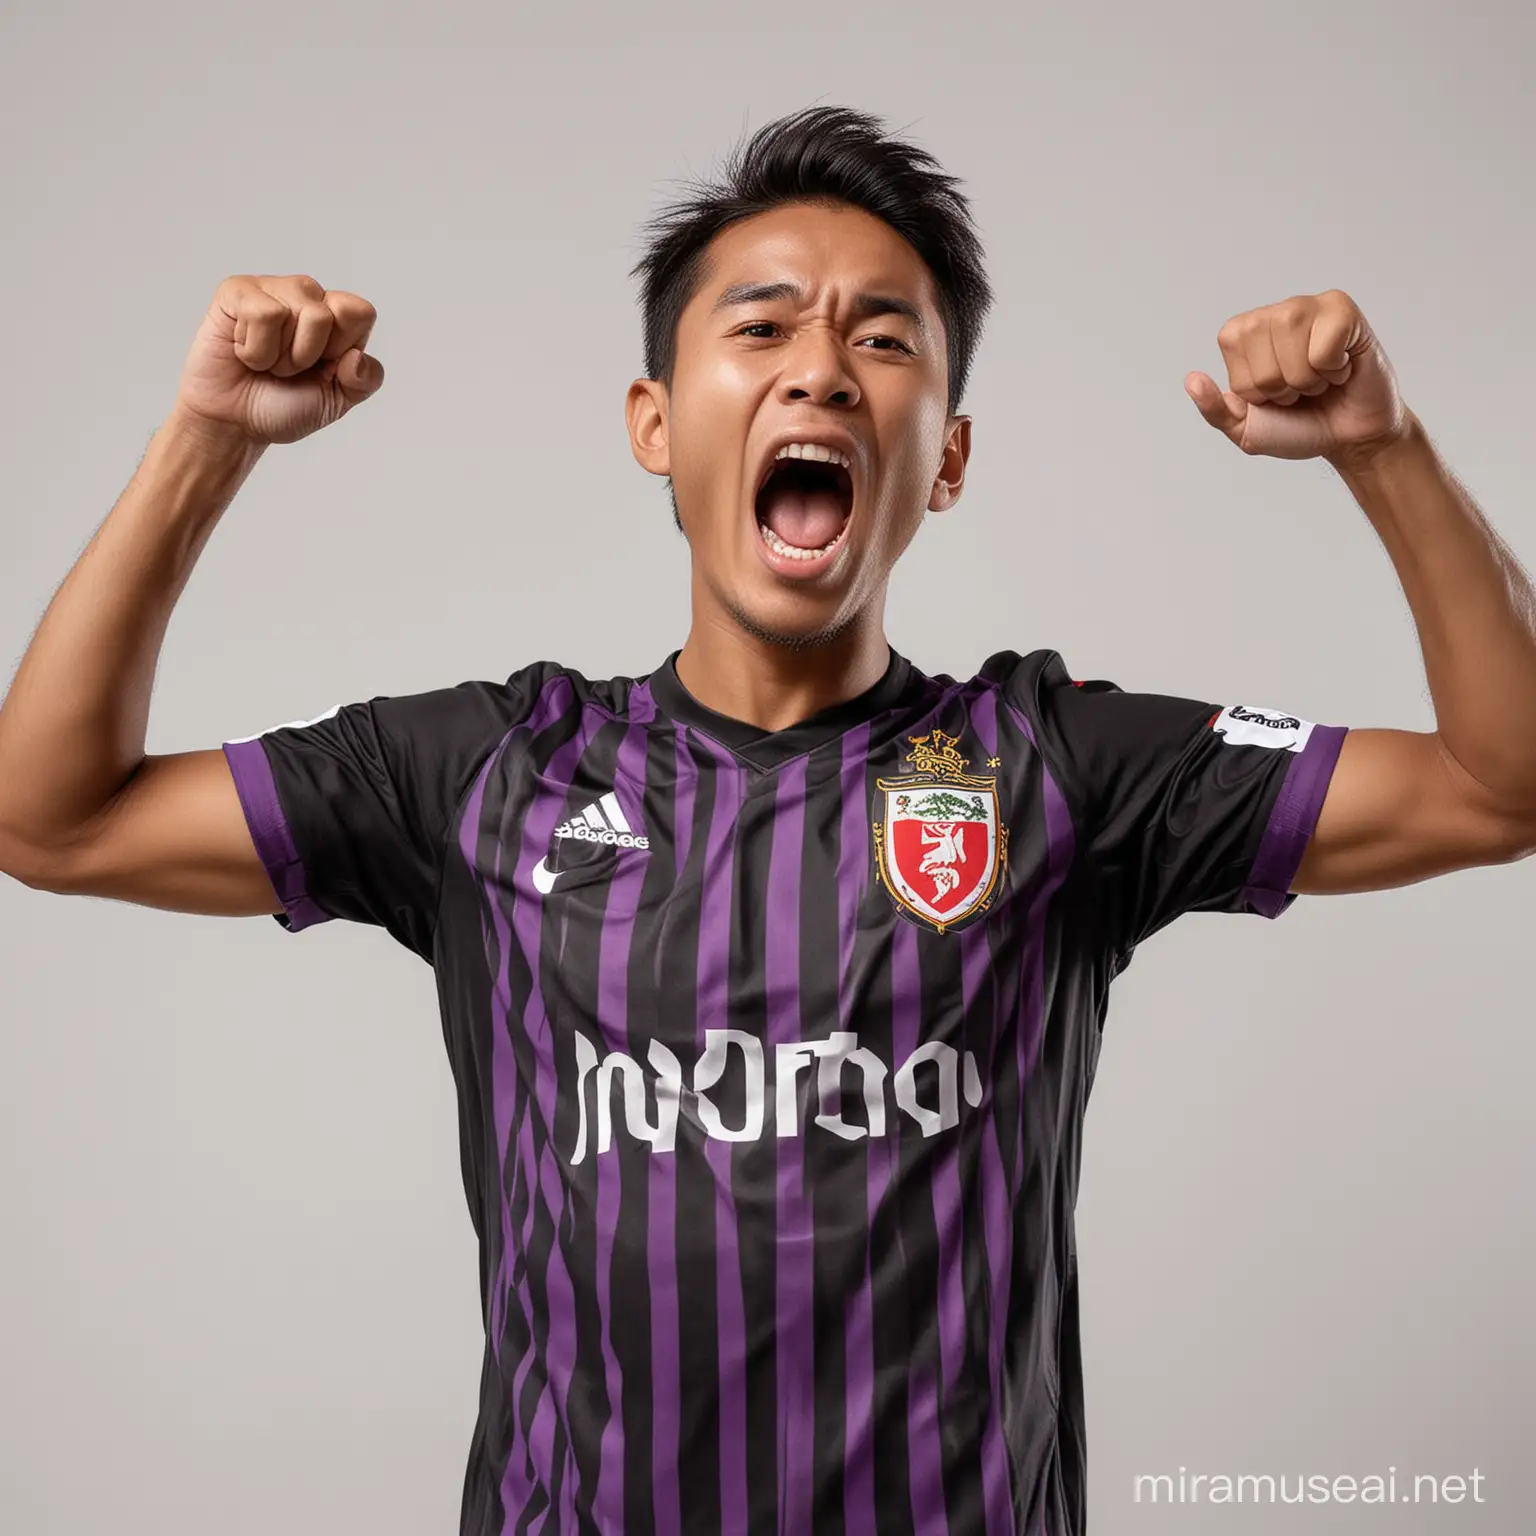 photo of a soccer player from Indonesia, wearing a black team shirt with purple stripes on the sleeves and collar, with facial gestures shouting in celebration of scoring a goal. white background